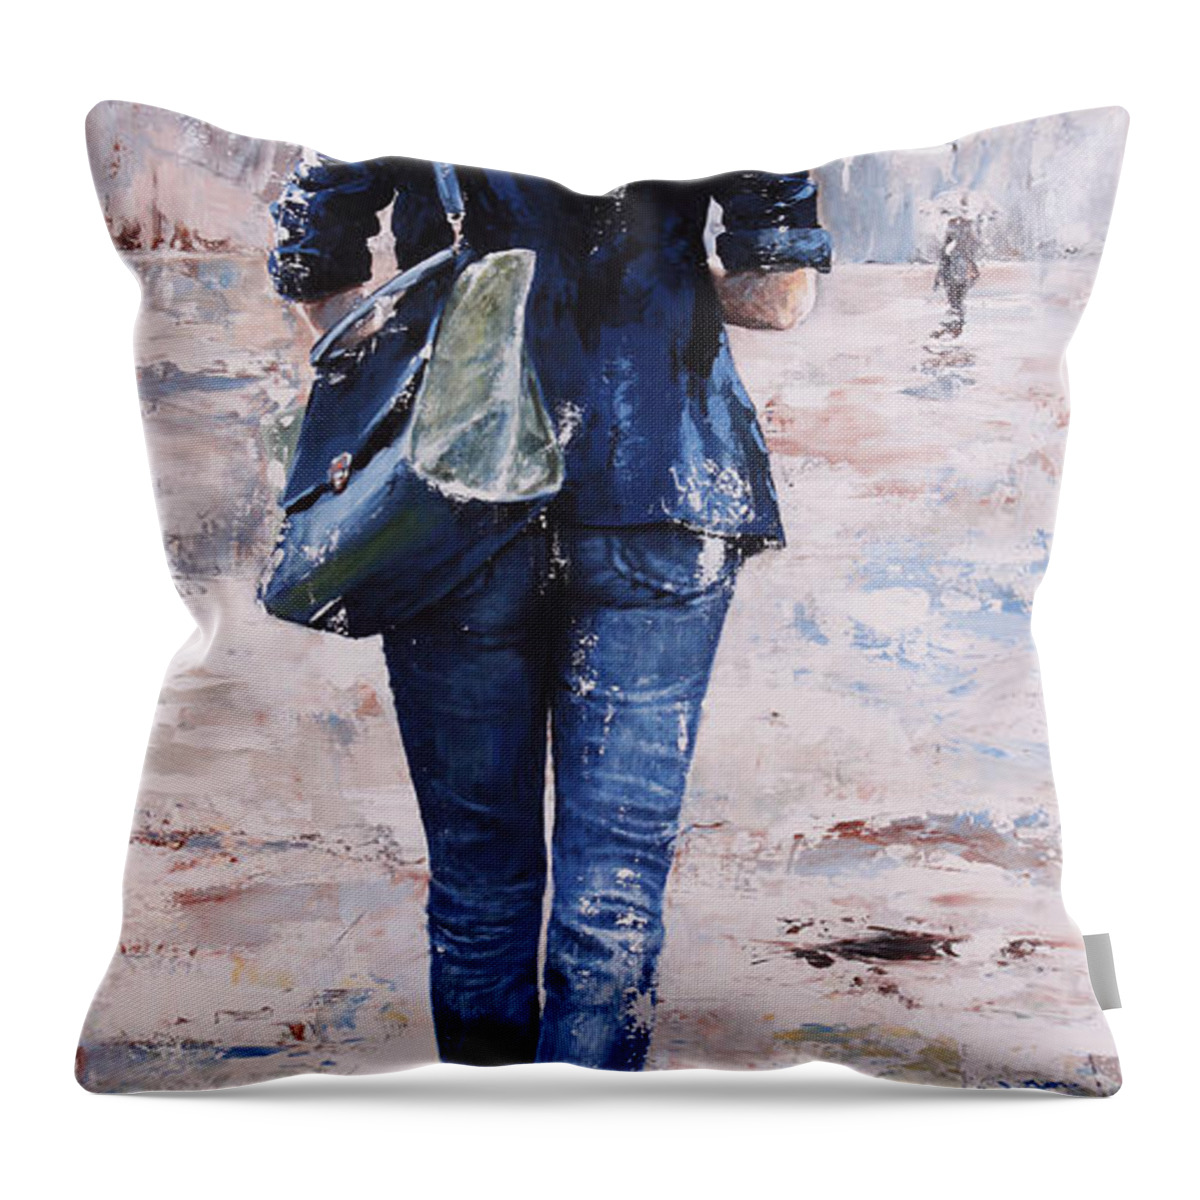 Rain Throw Pillow featuring the painting Rainy Day #22 by Emerico Imre Toth